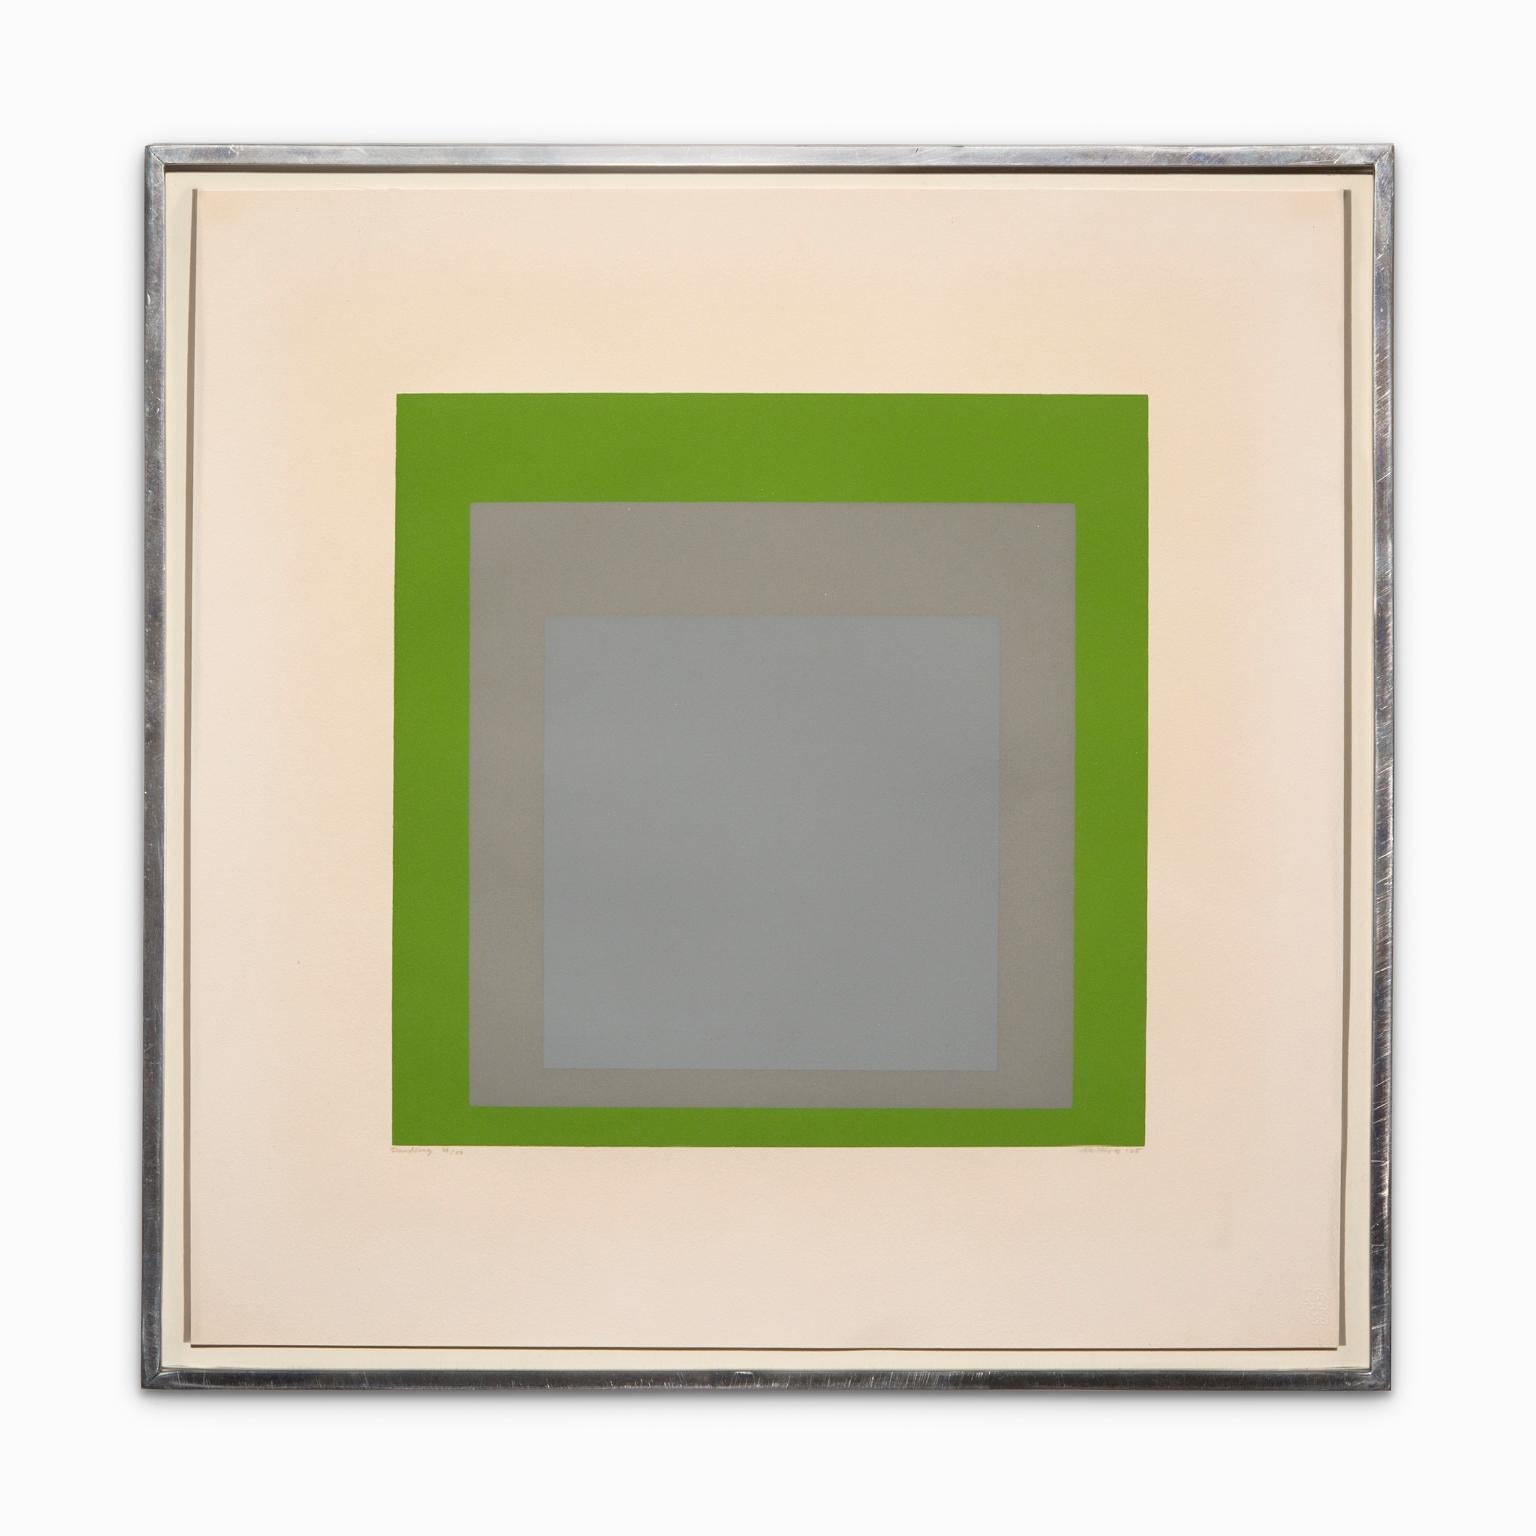 Josef Albers Abstract Print - "Pending", Original Abstract Screenprint, Titled, Signed, and Numbered in Pencil